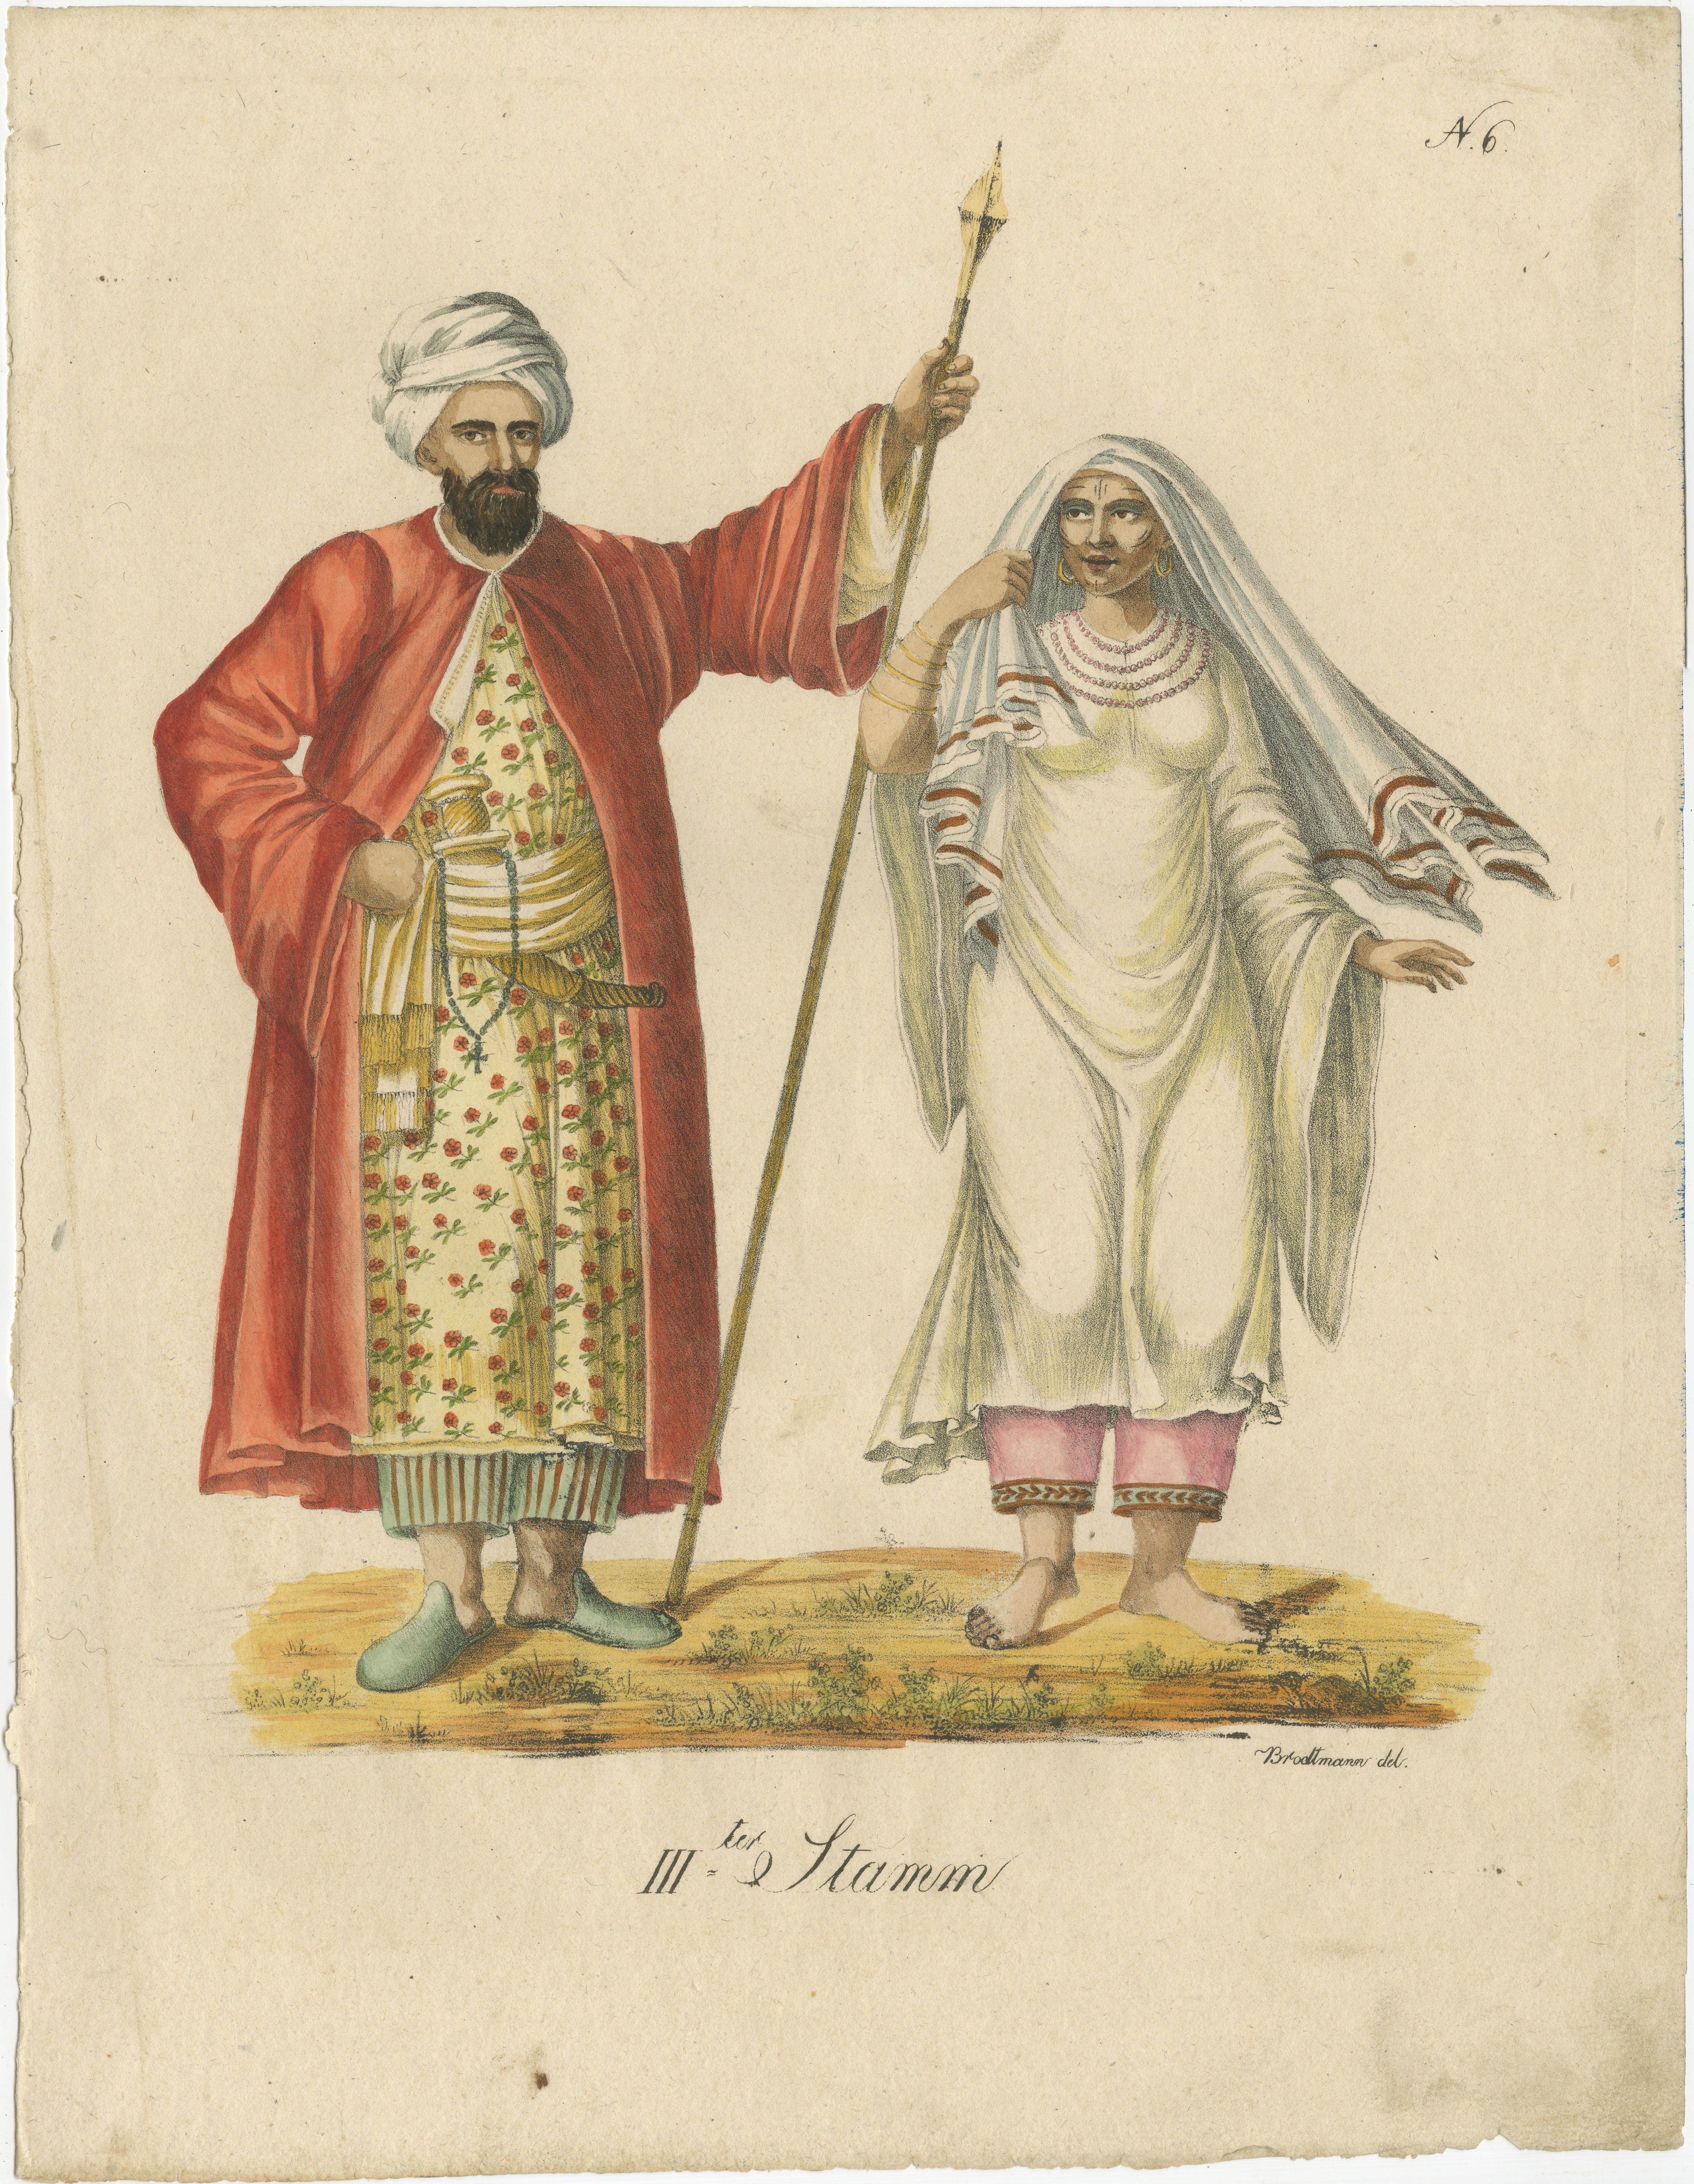 Antique print titled 'IIIter Stamm'. Lithograph of an Arab man and woman. This print originates from 'Naturhistorische Bilder-Galerie' by Brodtmann. Published circa 1816. 